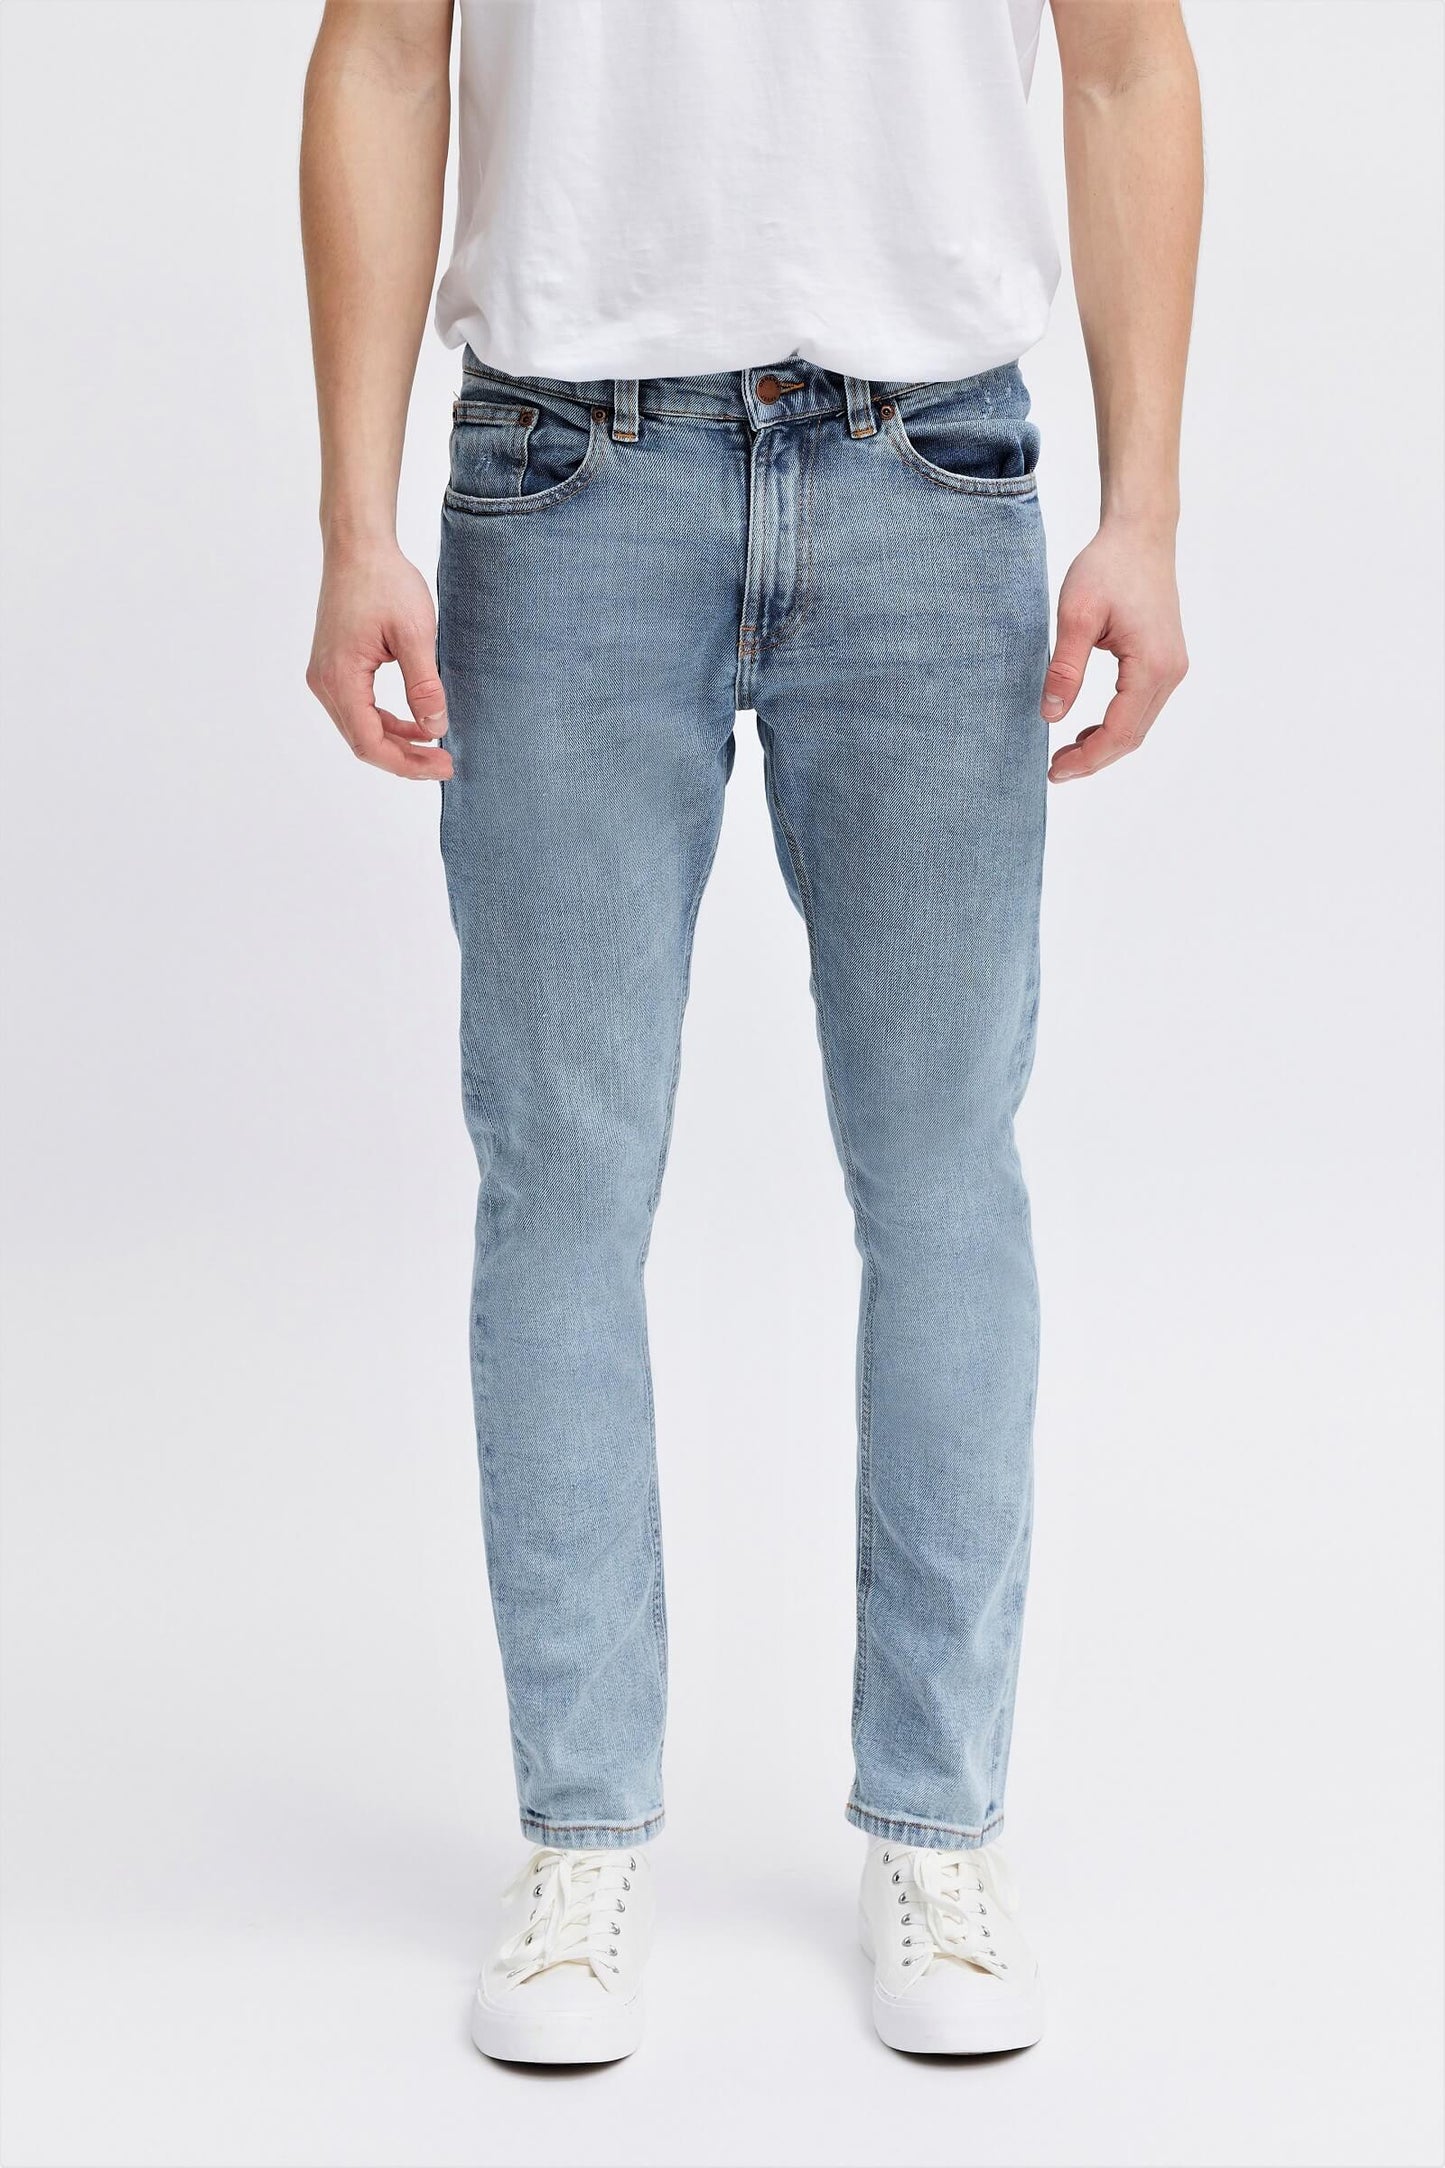 Organic jeans - Men's Tapered Fit